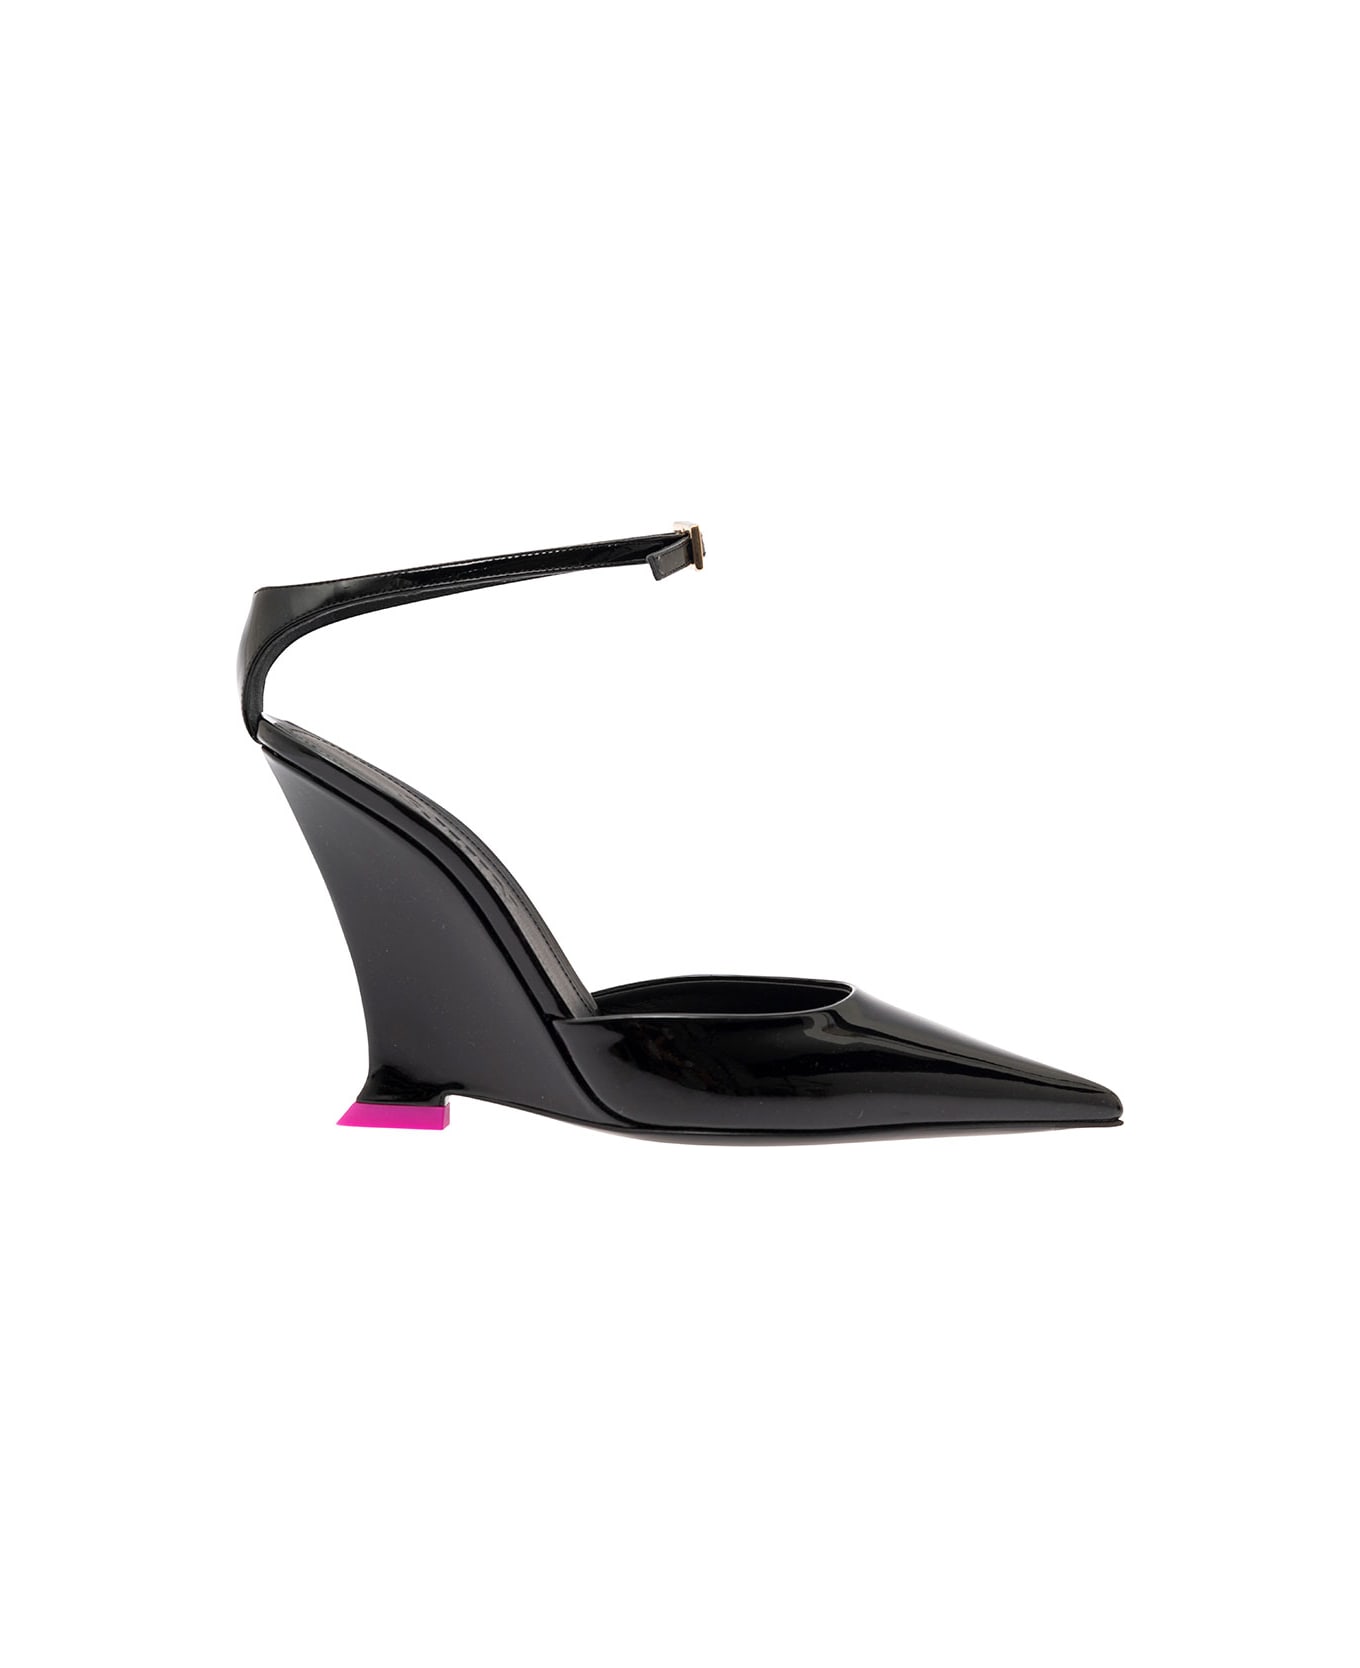 3JUIN 'clea' Black Pumps With Wedge Heel And Contrasting Detail In Leather Woman - Black